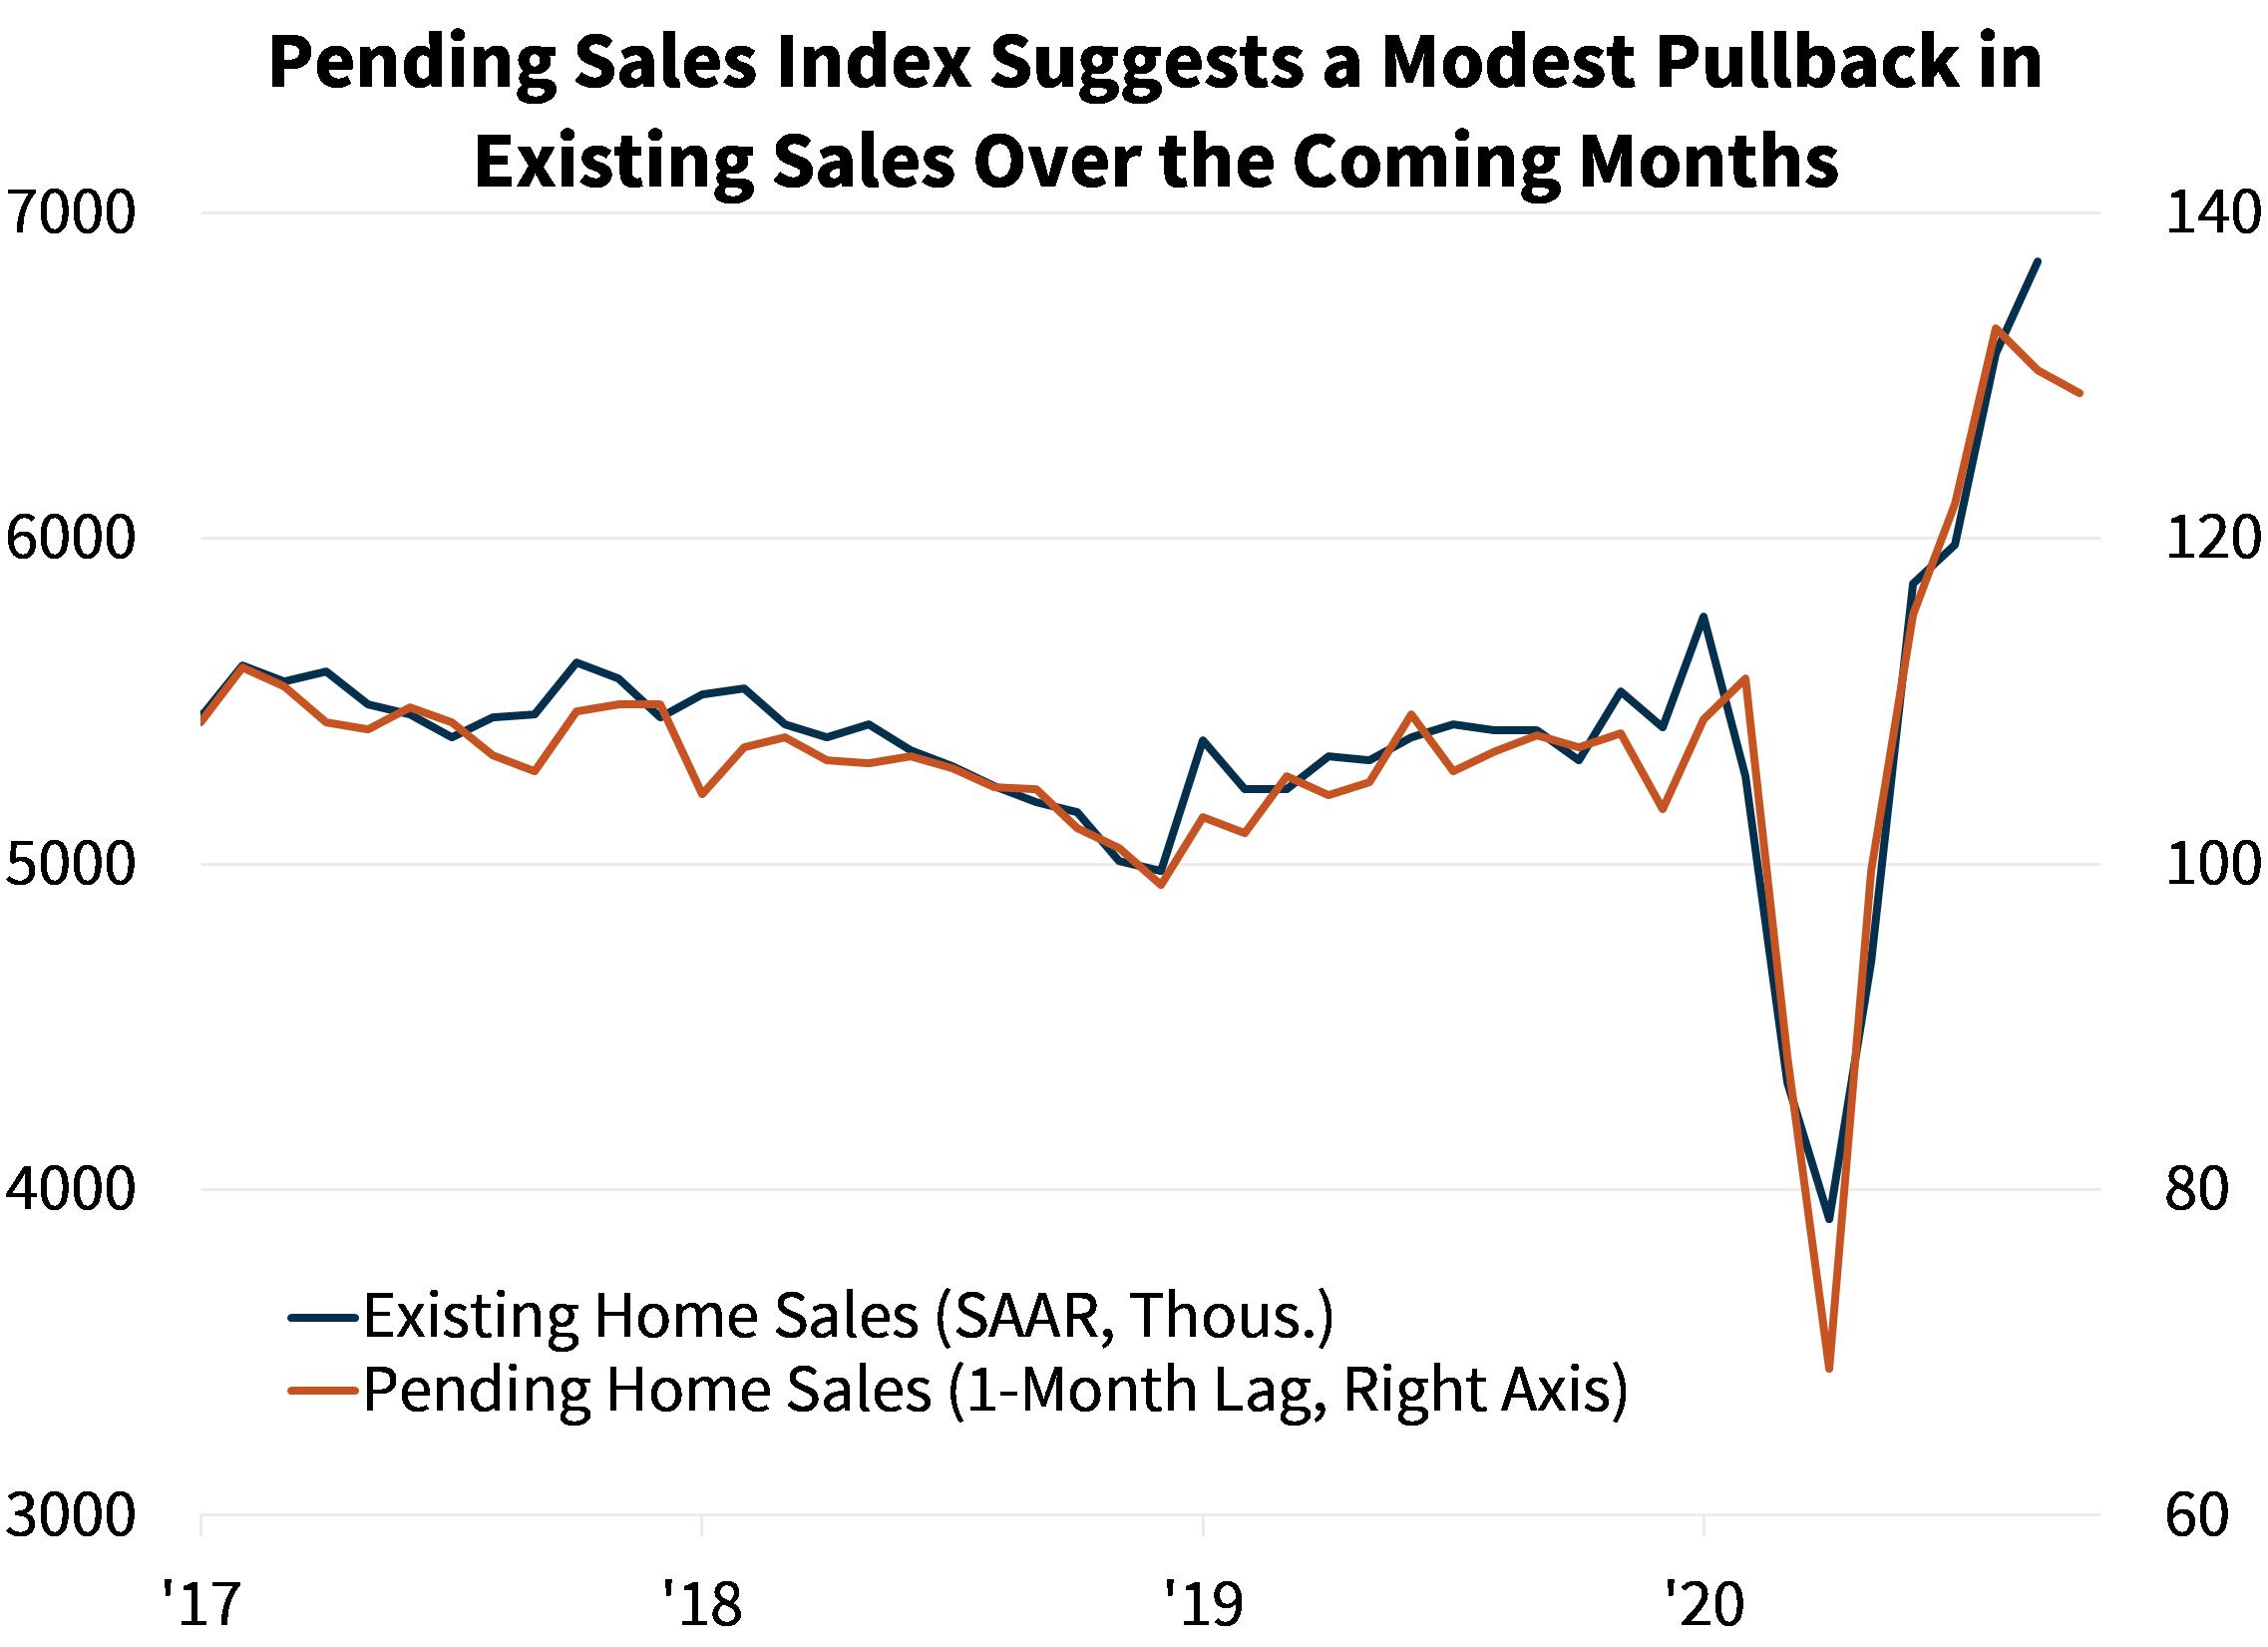  Pending Sales Index Suggests a Modest Pullback in Existing Sales Over the Coming Months
 